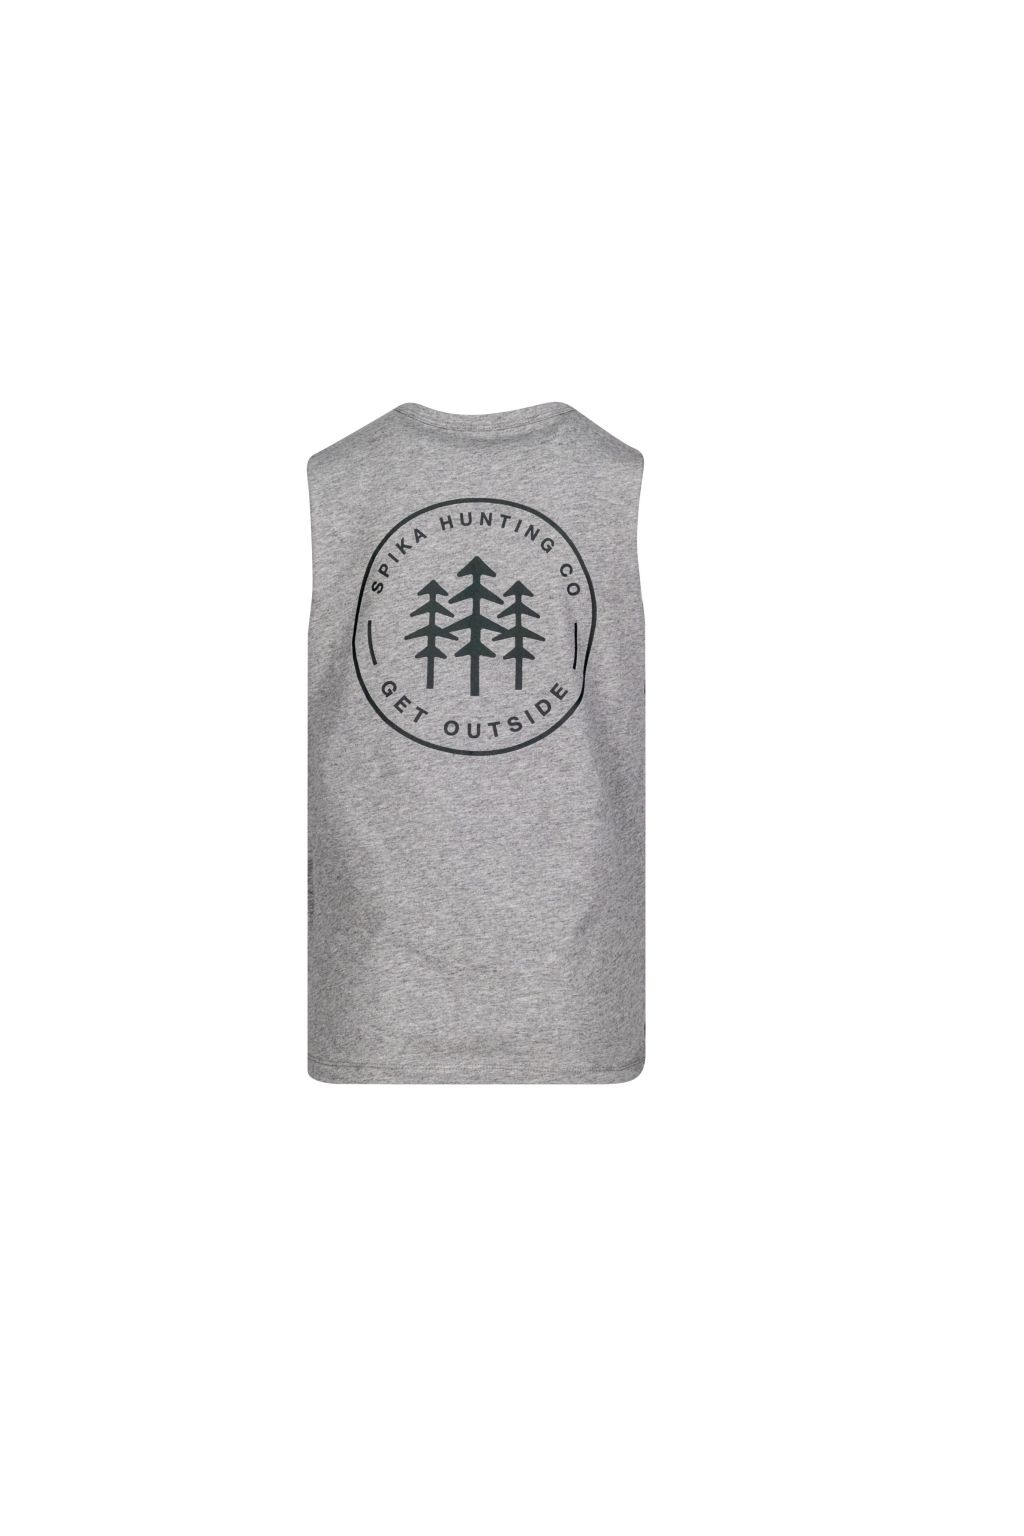 Spika GO Classic Kids Singlet - Grey -  - Mansfield Hunting & Fishing - Products to prepare for Corona Virus